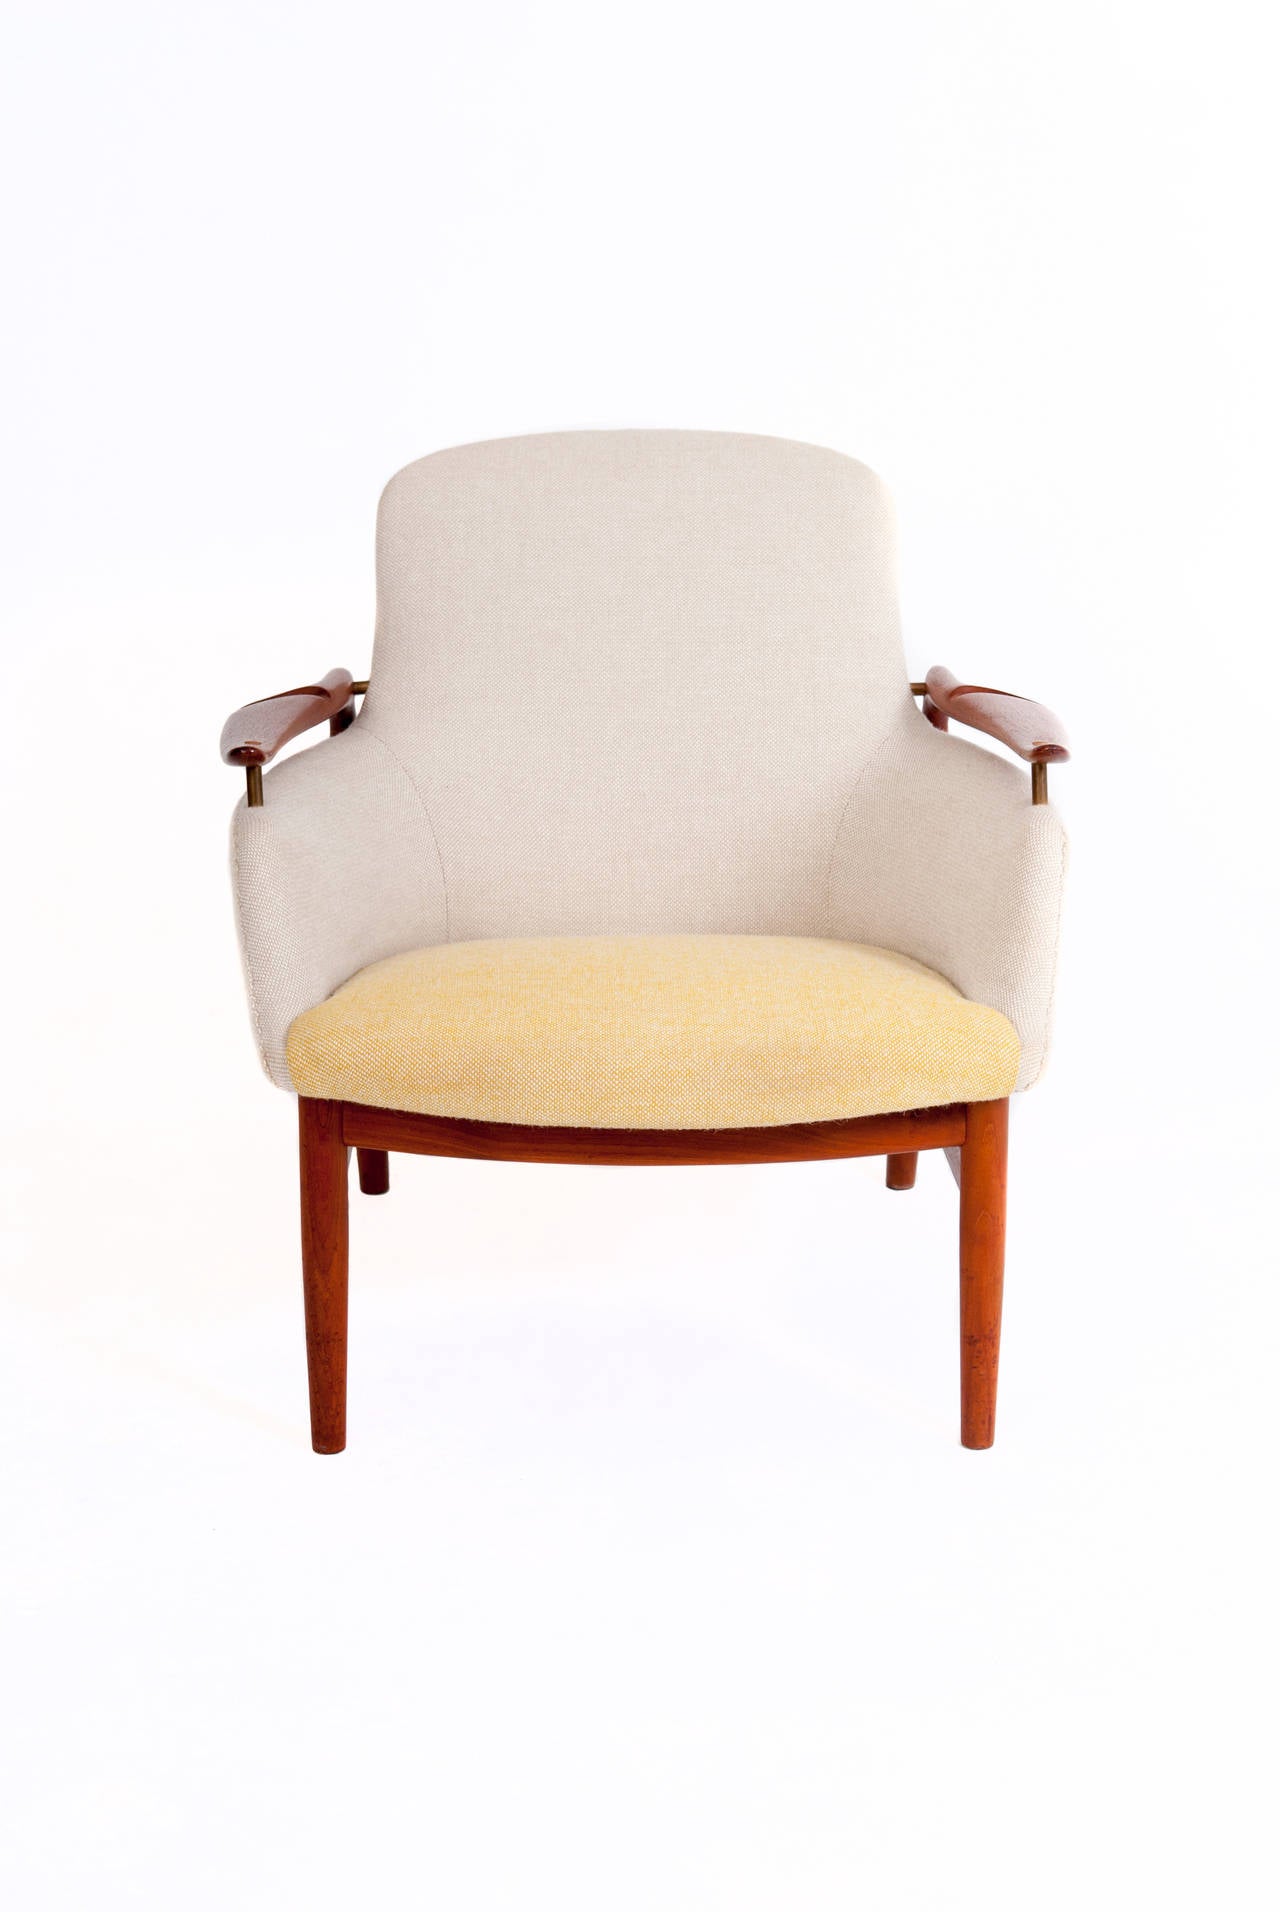 Finn Juhl lounge chair, model NV-53, with teak legs and armrests, upholstered in wool. 

Designed in 1953 for the cabinetmaker guild exhibition.

Stamped by Niels Vodder.